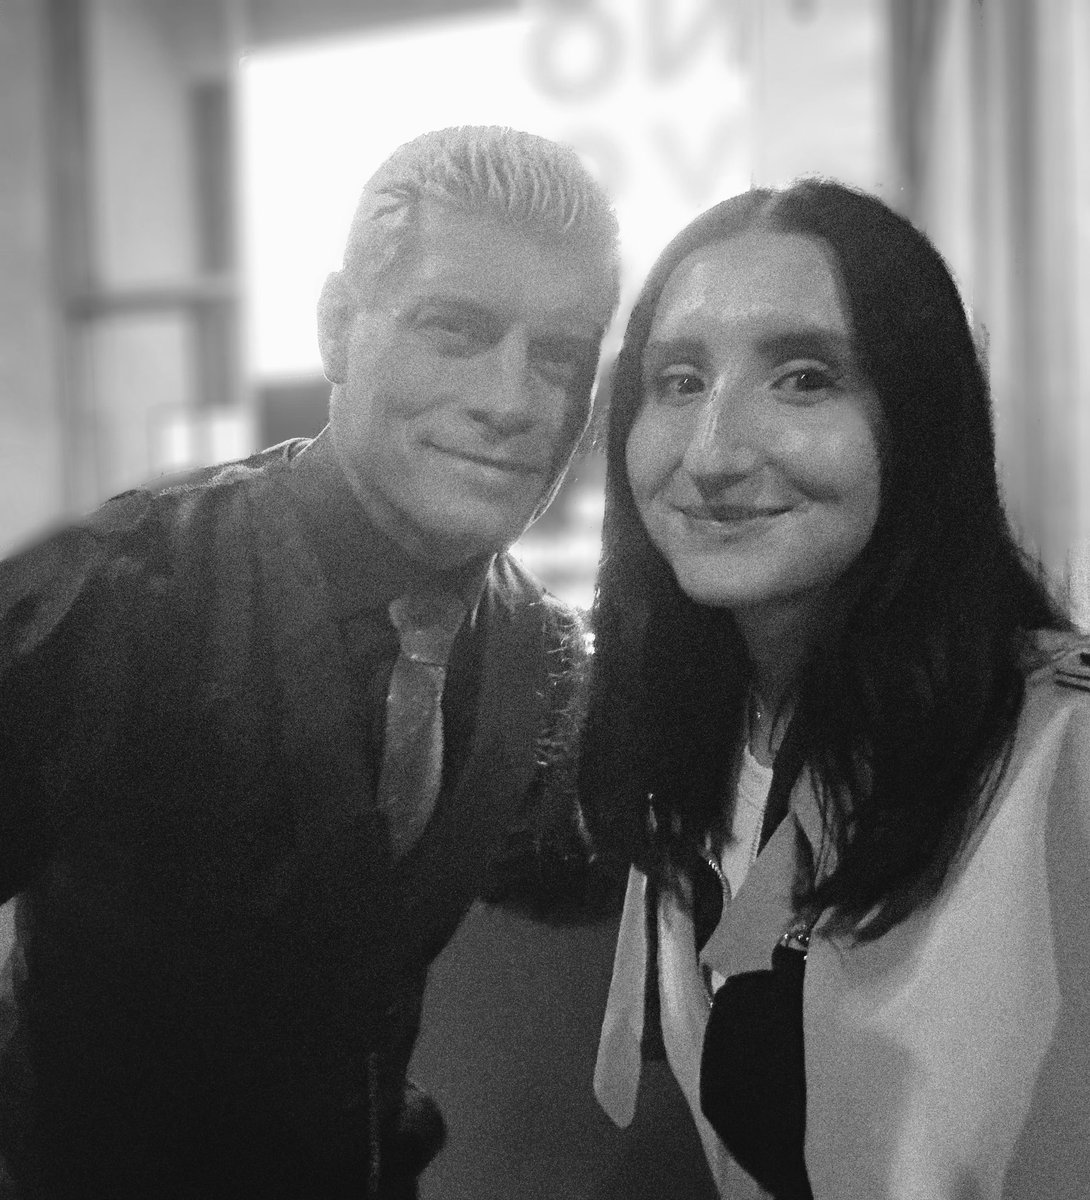 Always such a pleasure to meet you @CodyRhodes. Never met someone half kind as you are. You’re such a light in this world, never ever change!! 🤍